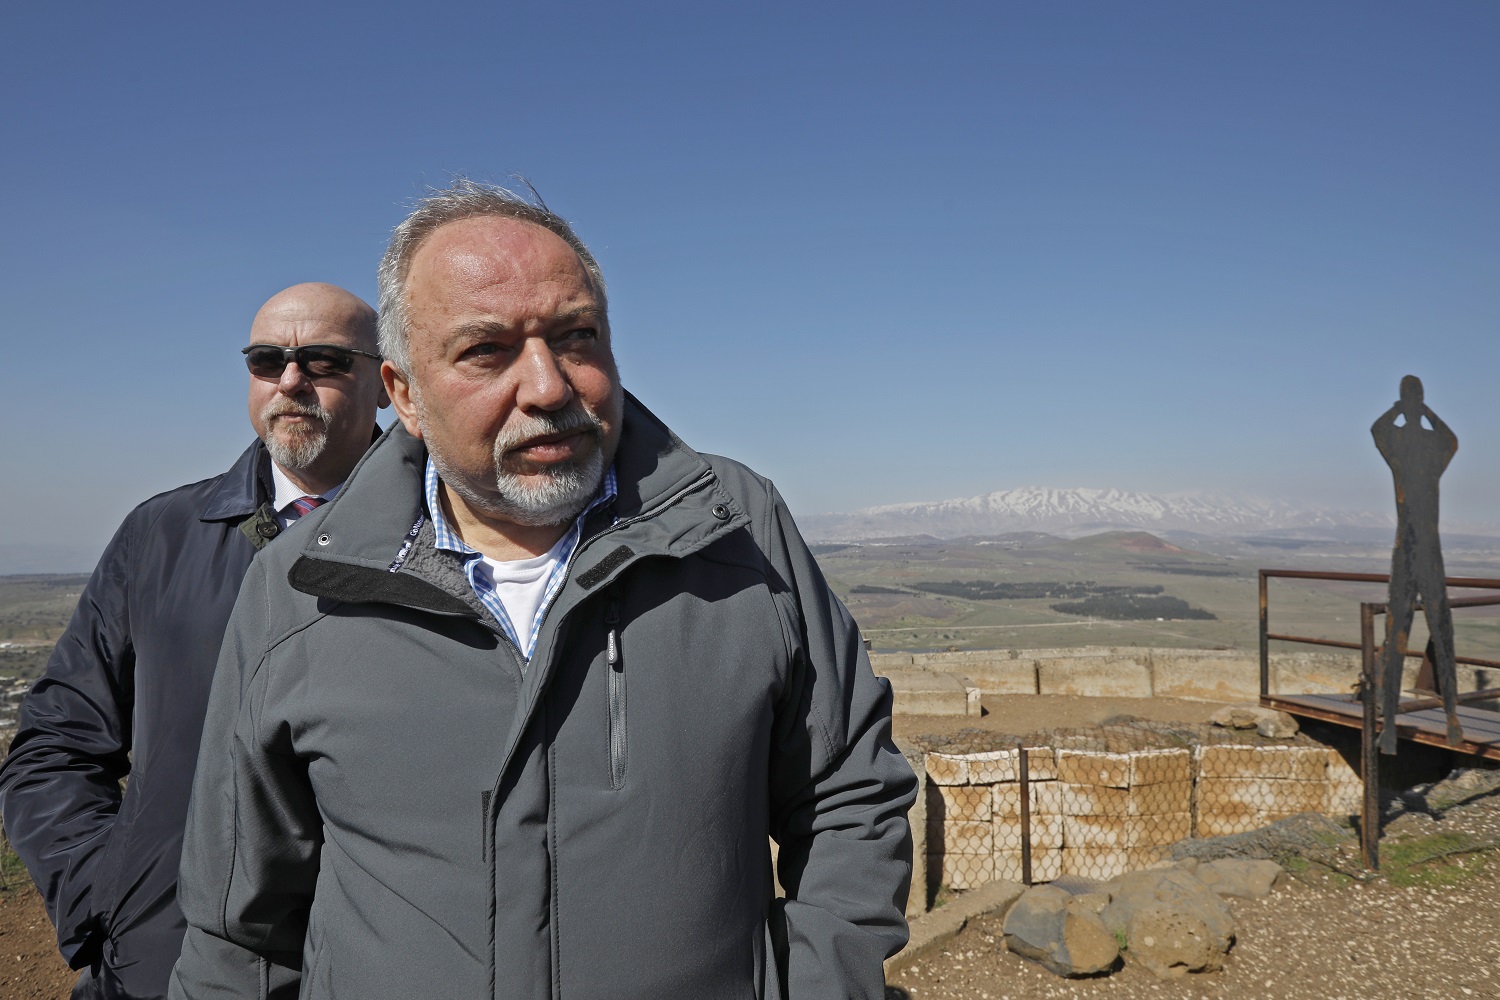 Avigdor Lieberman visits a lookout on  Mount Bental in the Golan Heights in February 2019 (AFP)